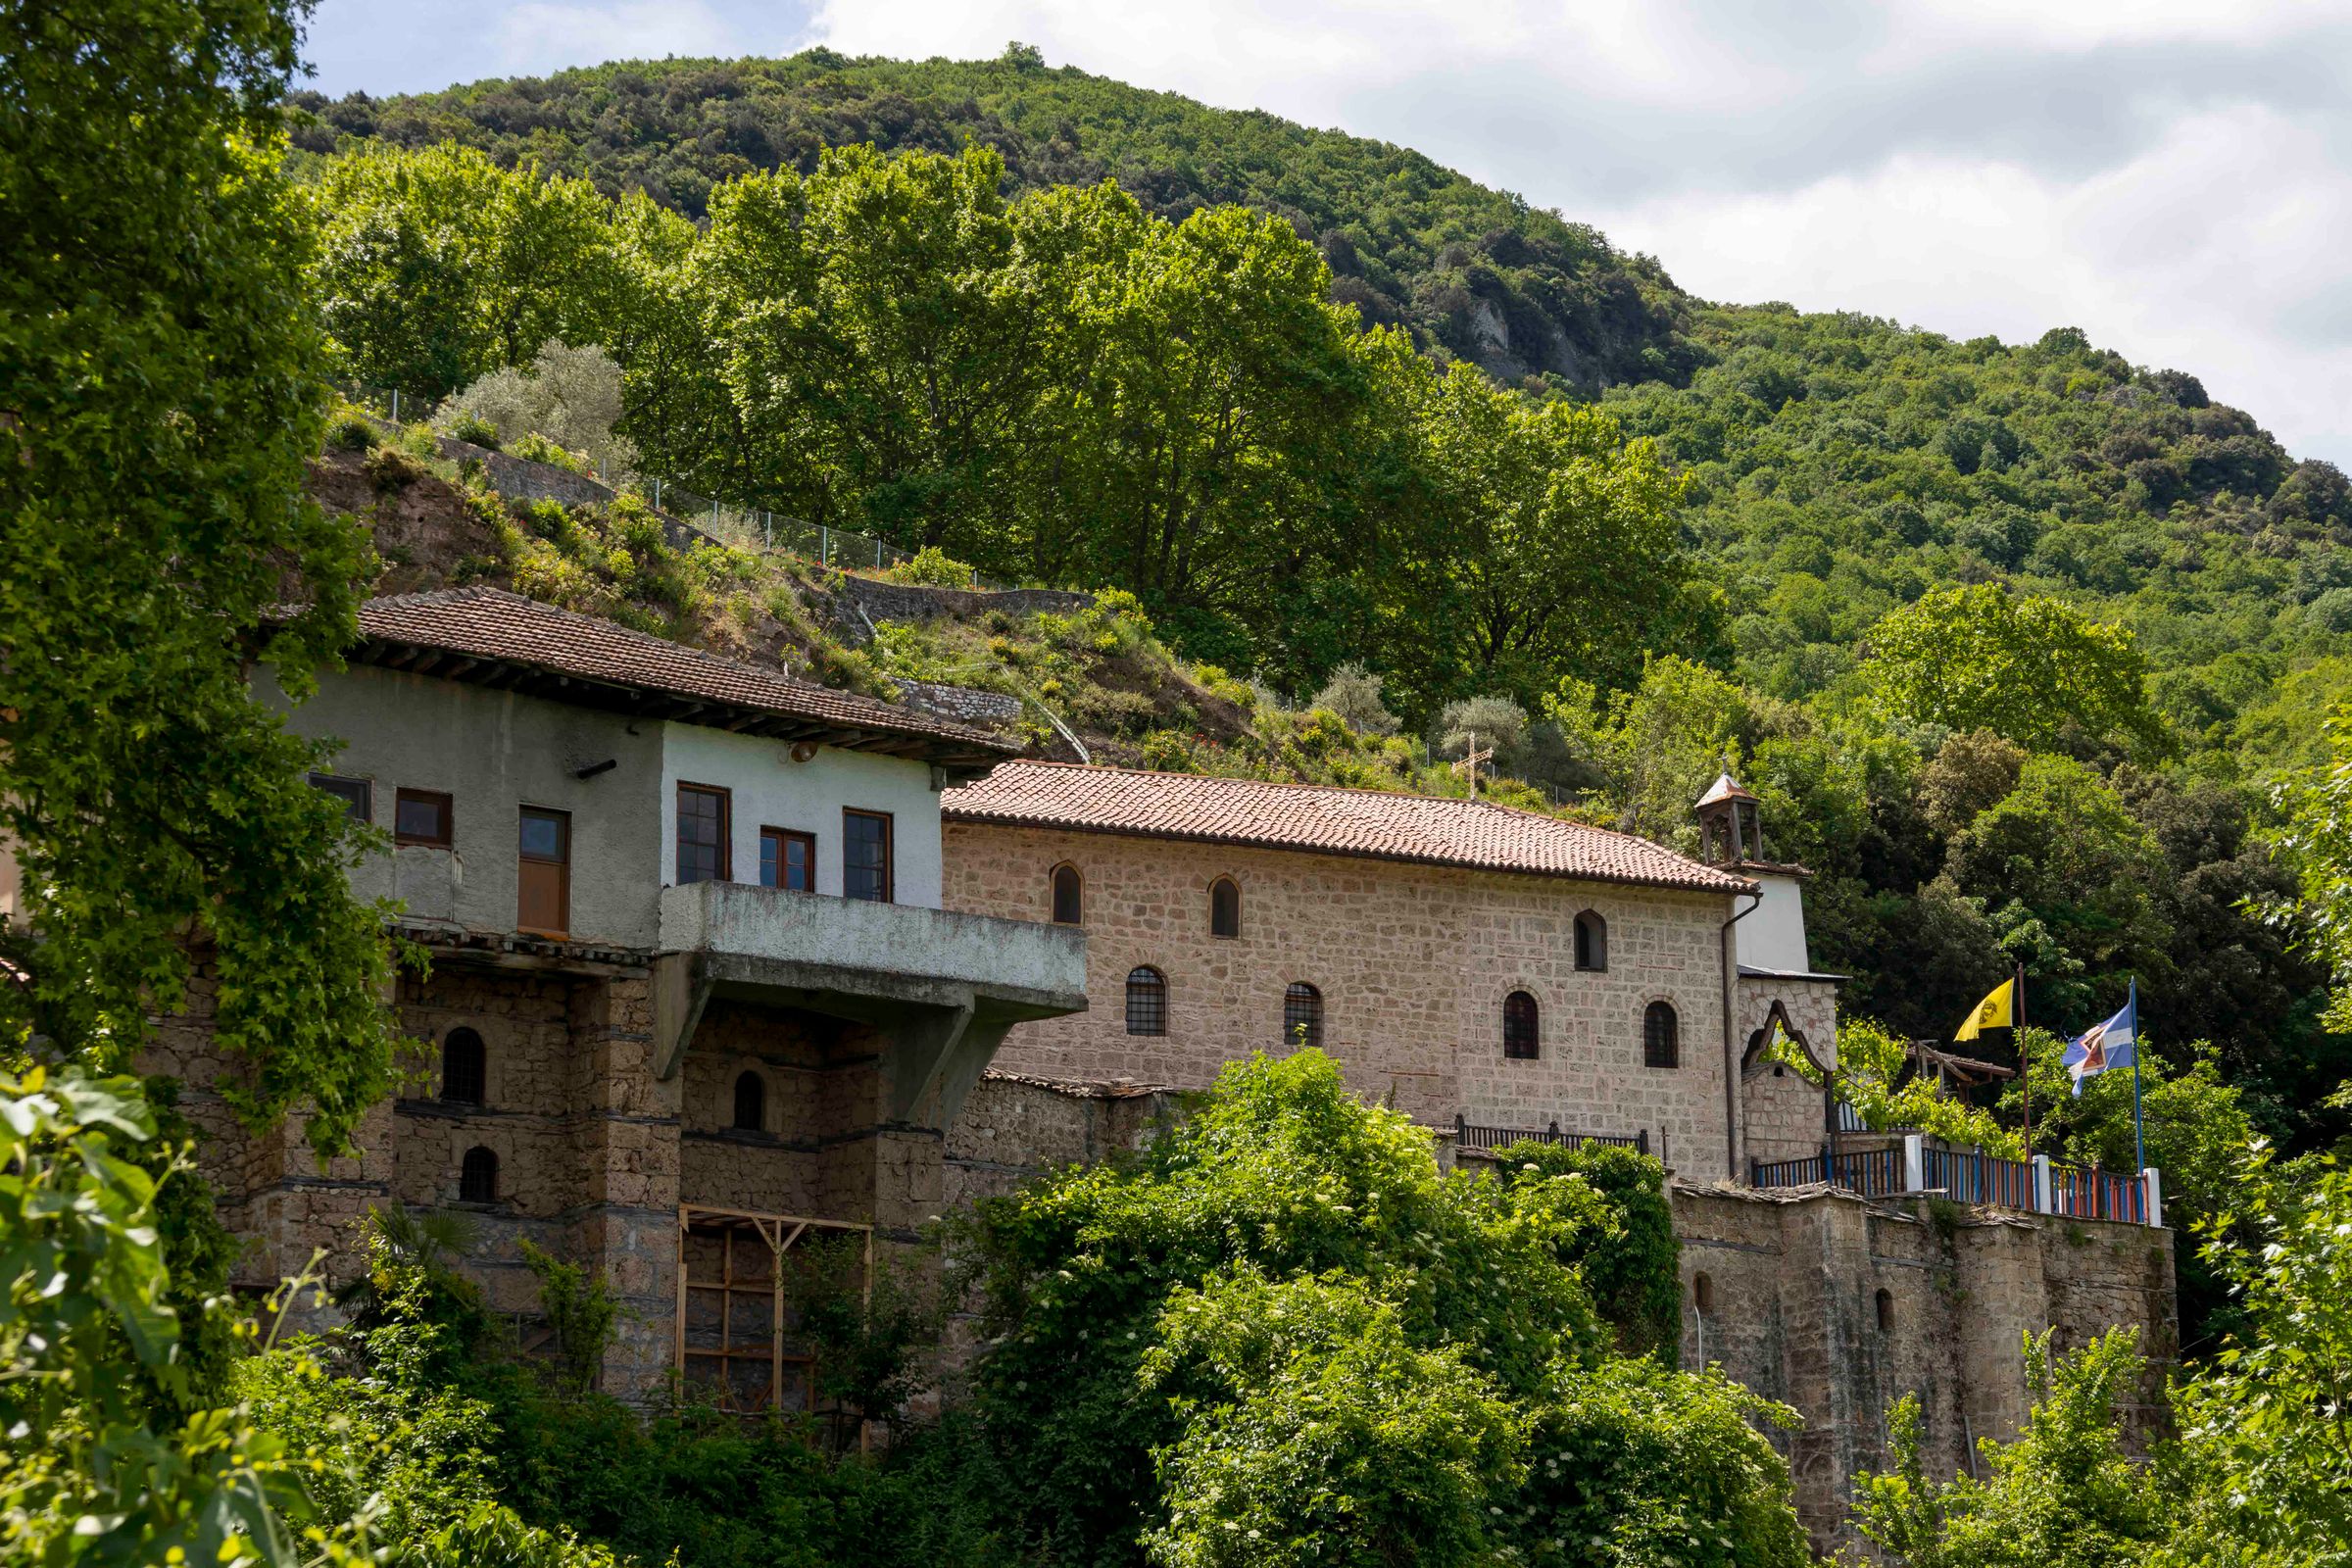 The monasteries and the culture of the Holy Skete of Veria